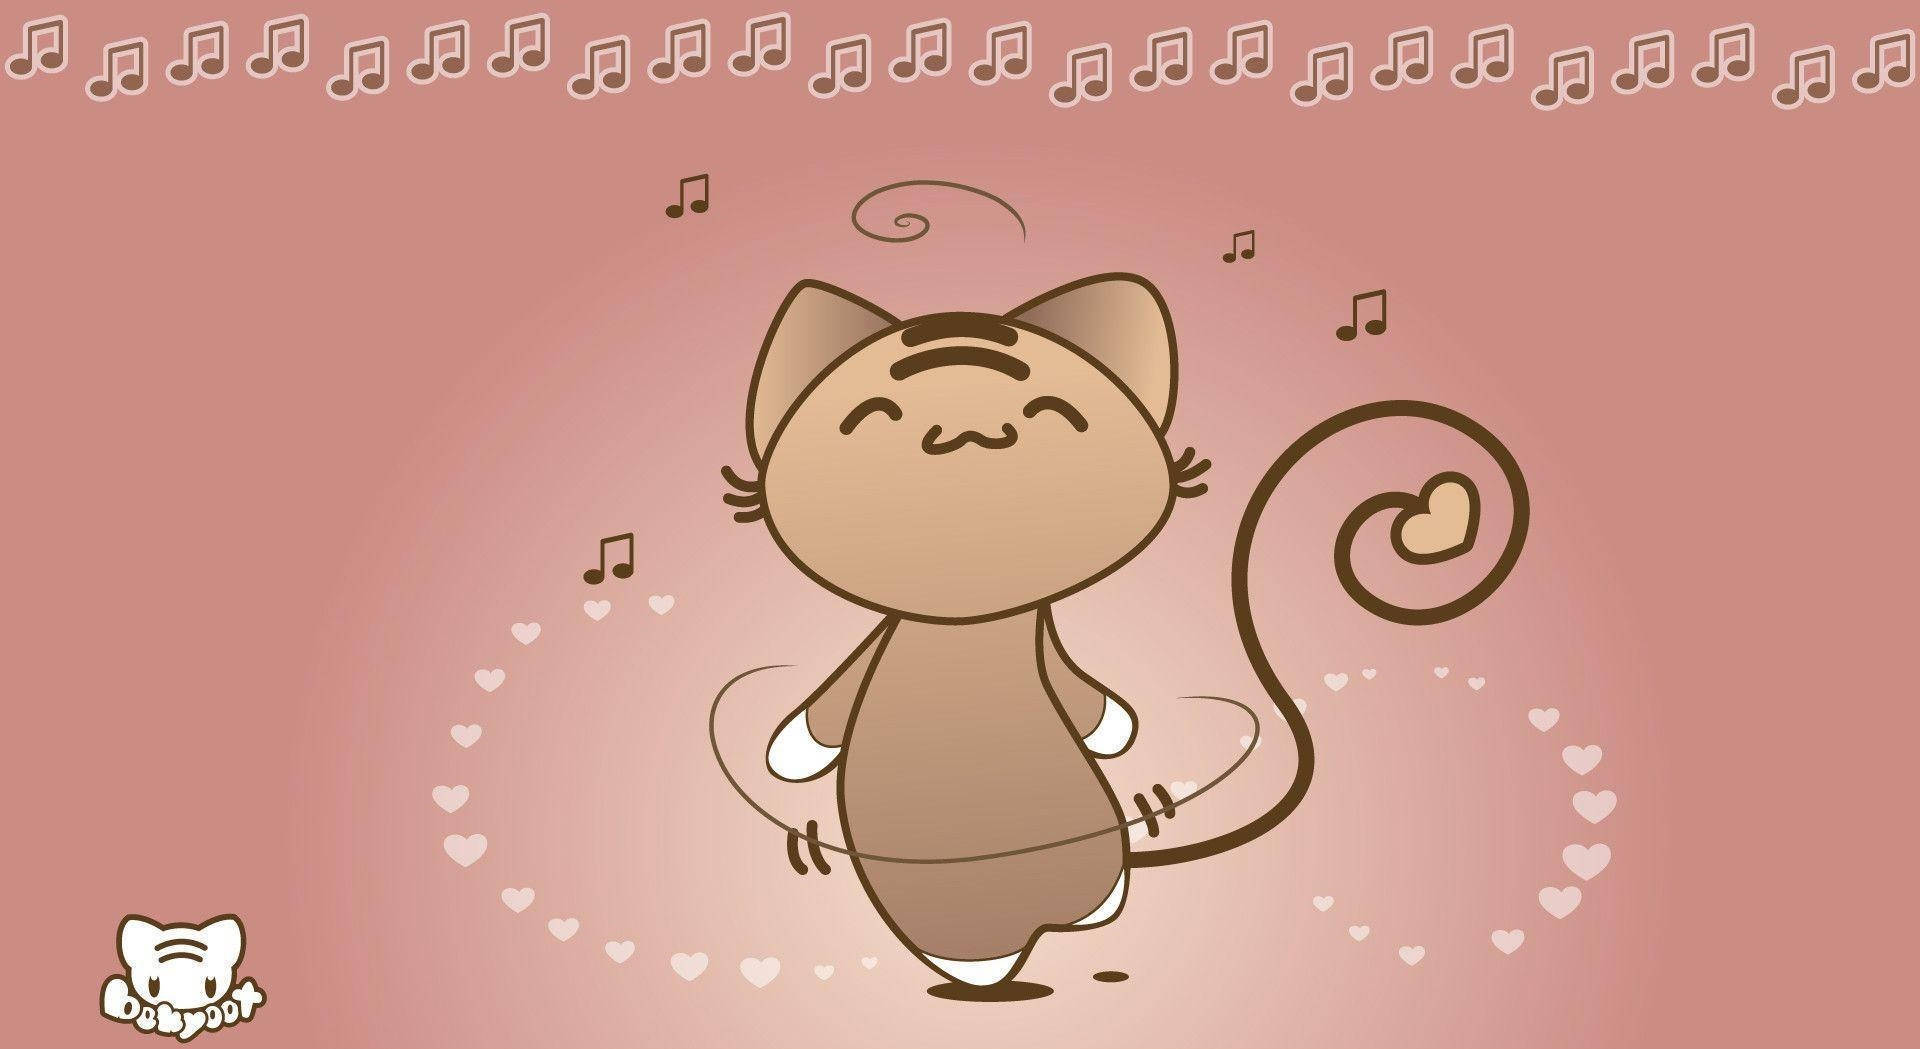 A Cat Is Dancing With Music Notes